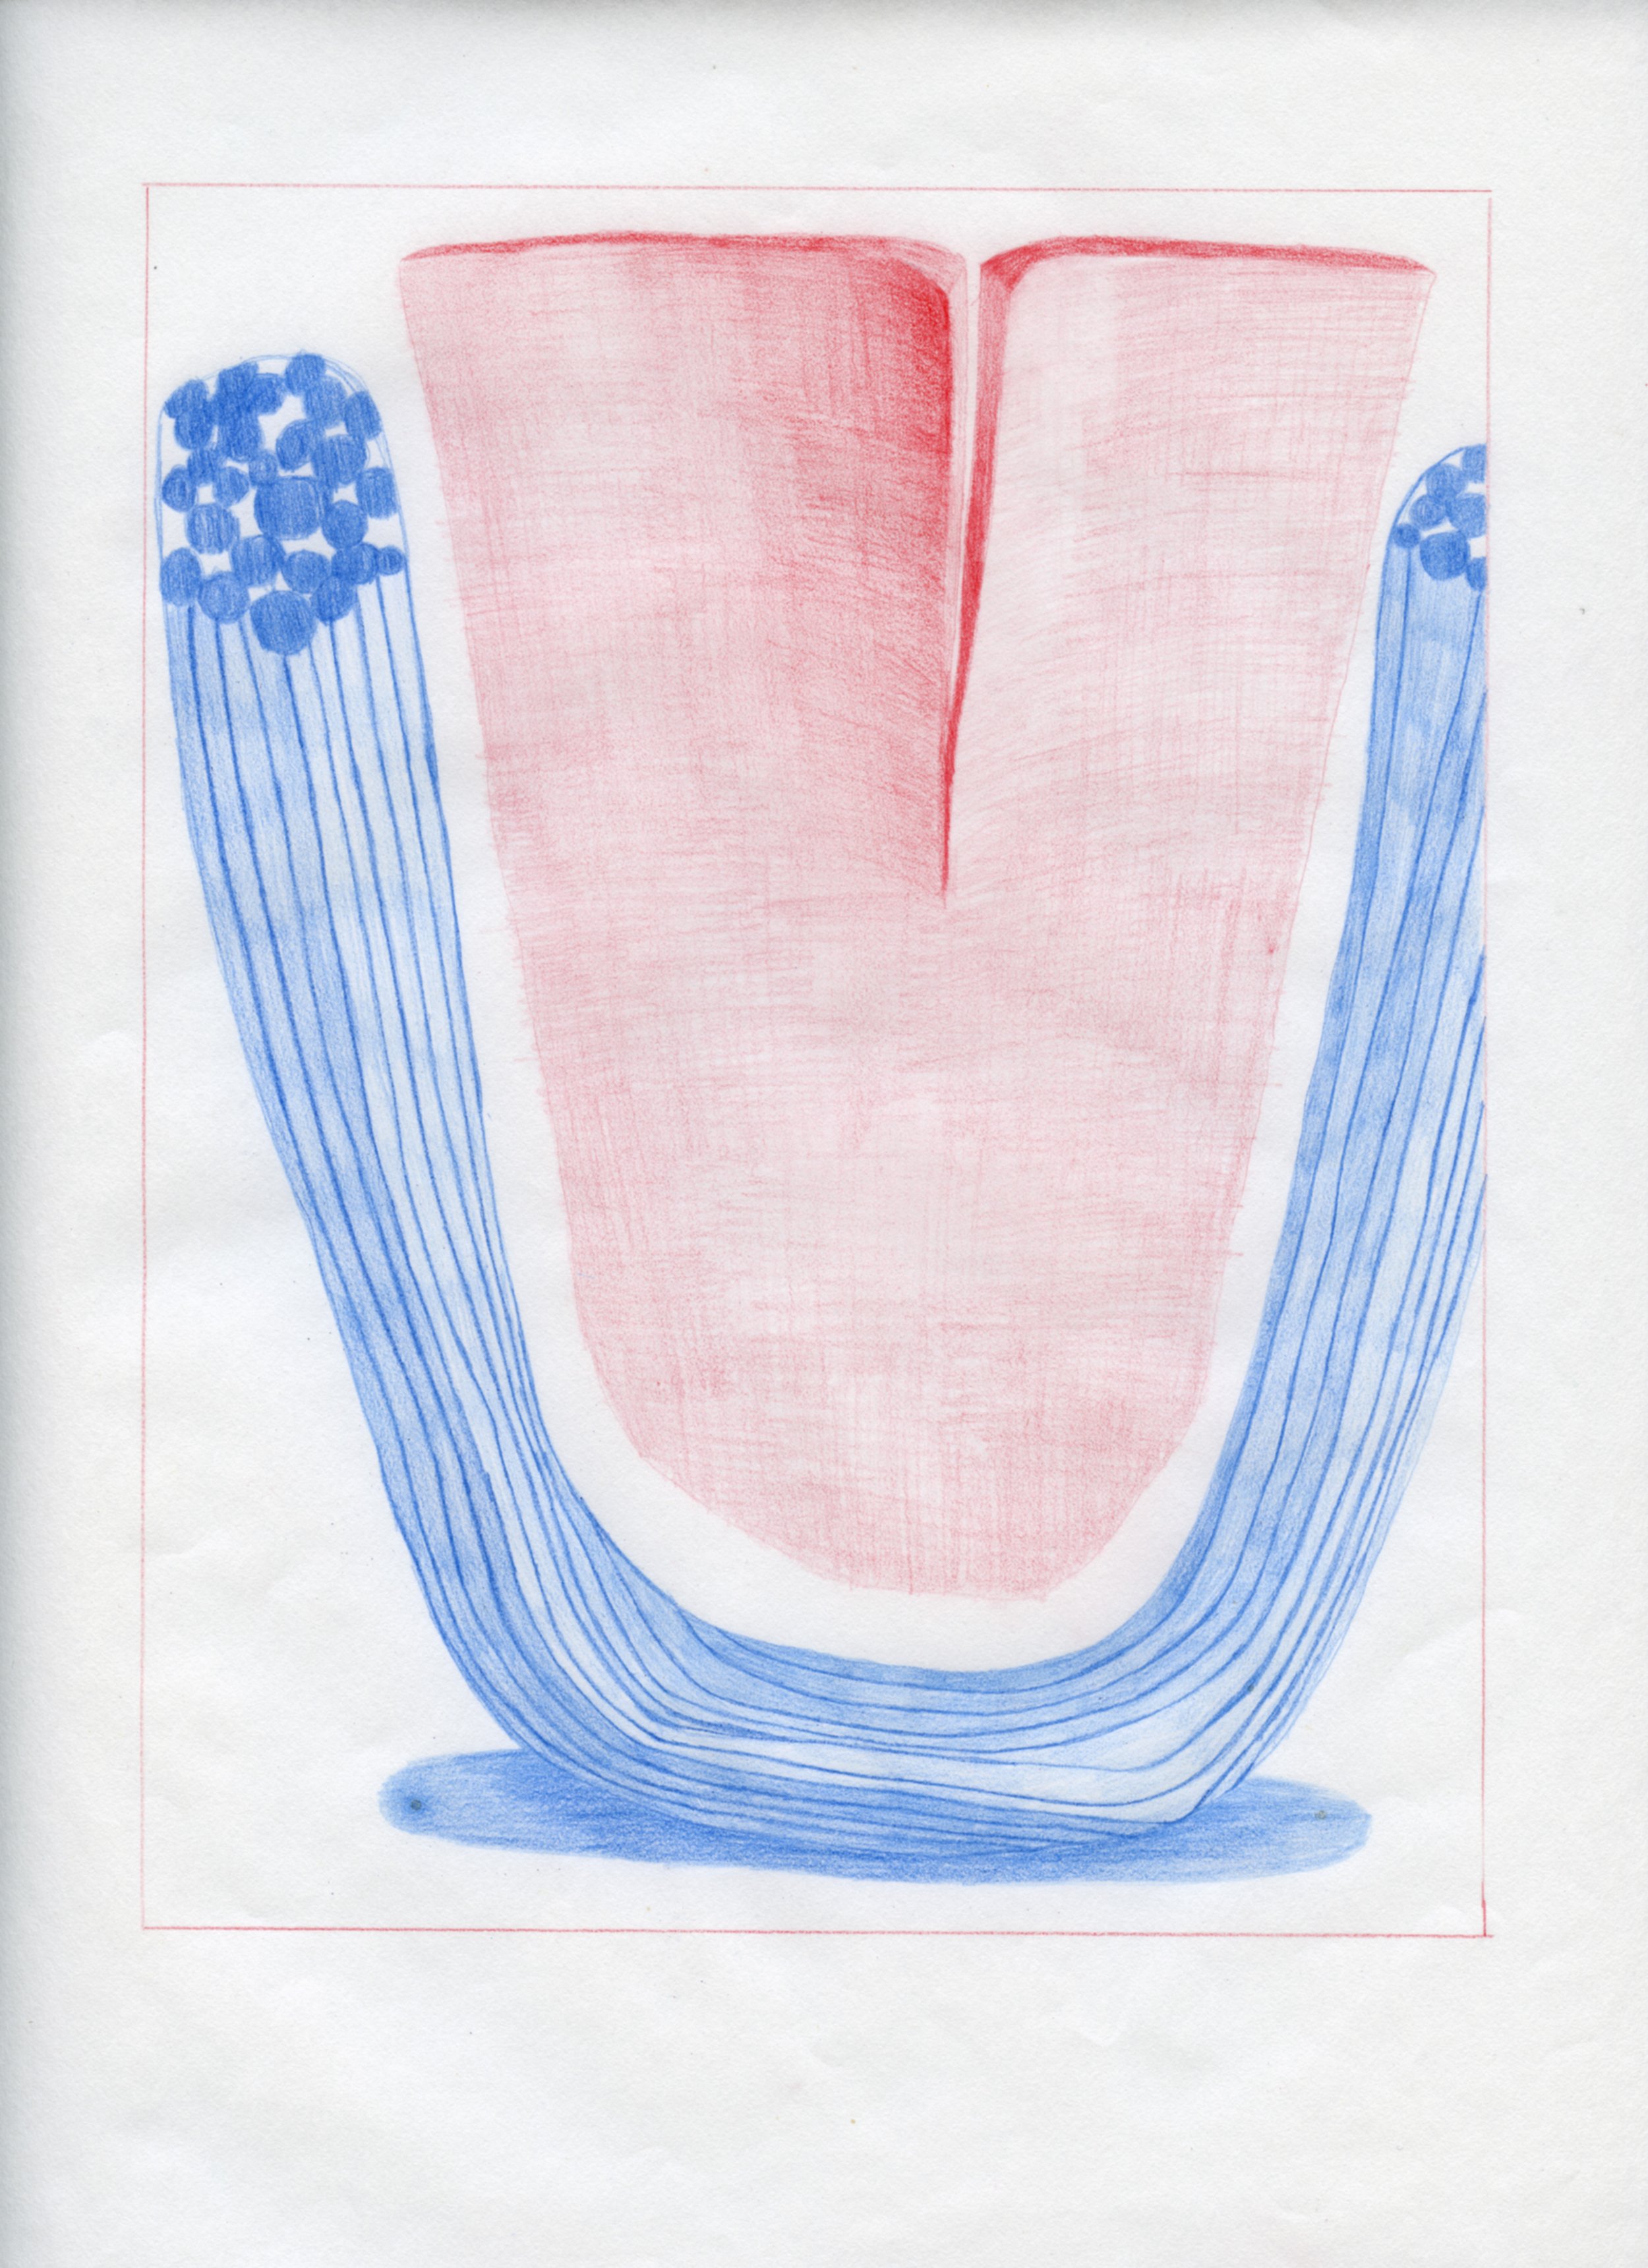  Workplace Drawing #13, 2021, Red and Blue Graphite on Bond Paper, 9”x 12”. 